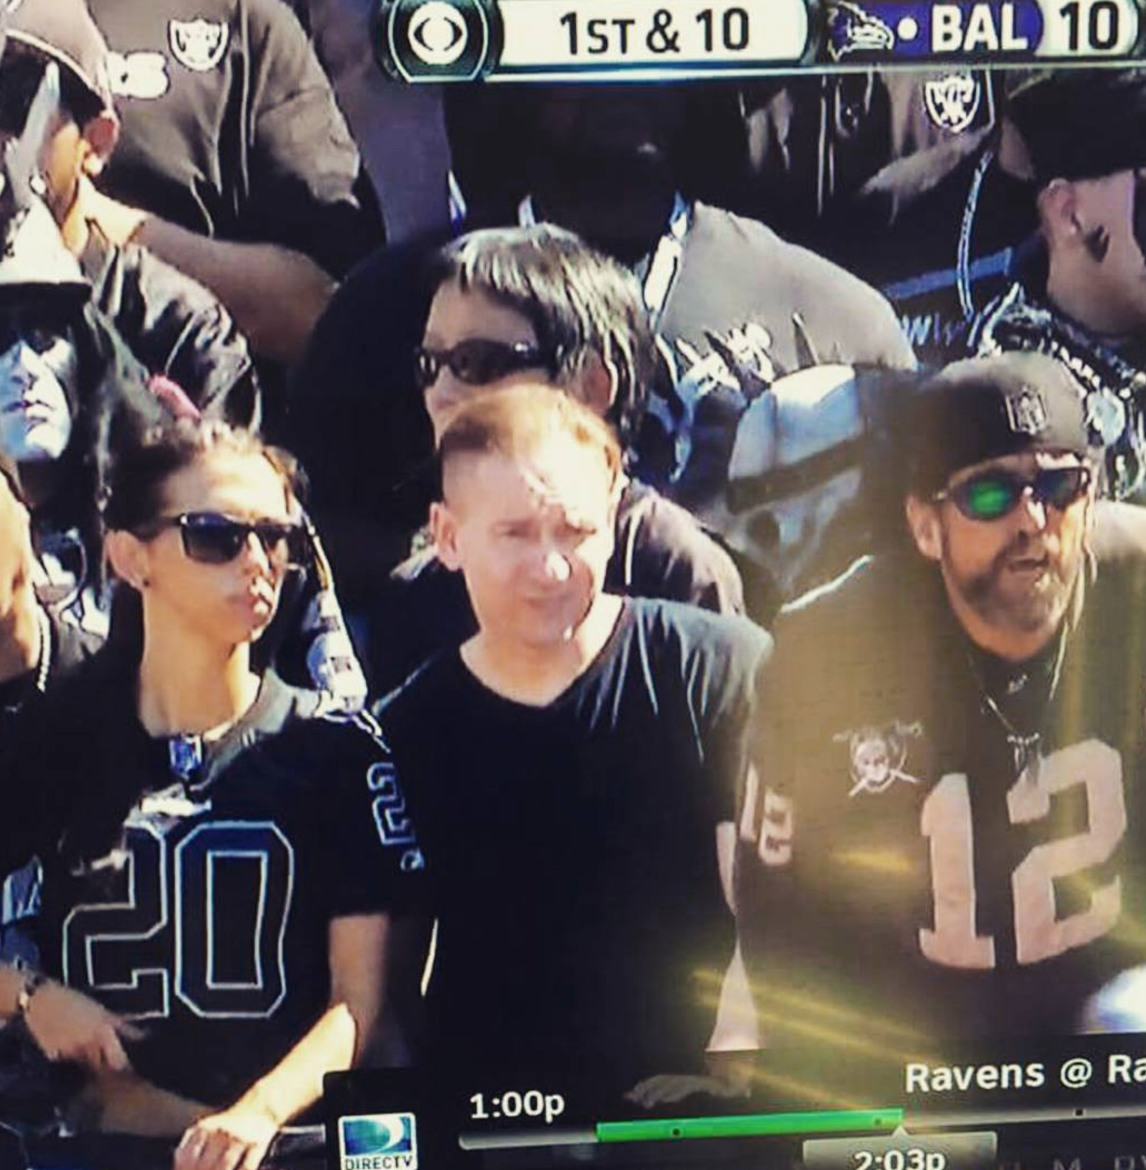 This Hot Oakland Raiders Fan Is Making The Internet Go Crazy Pics